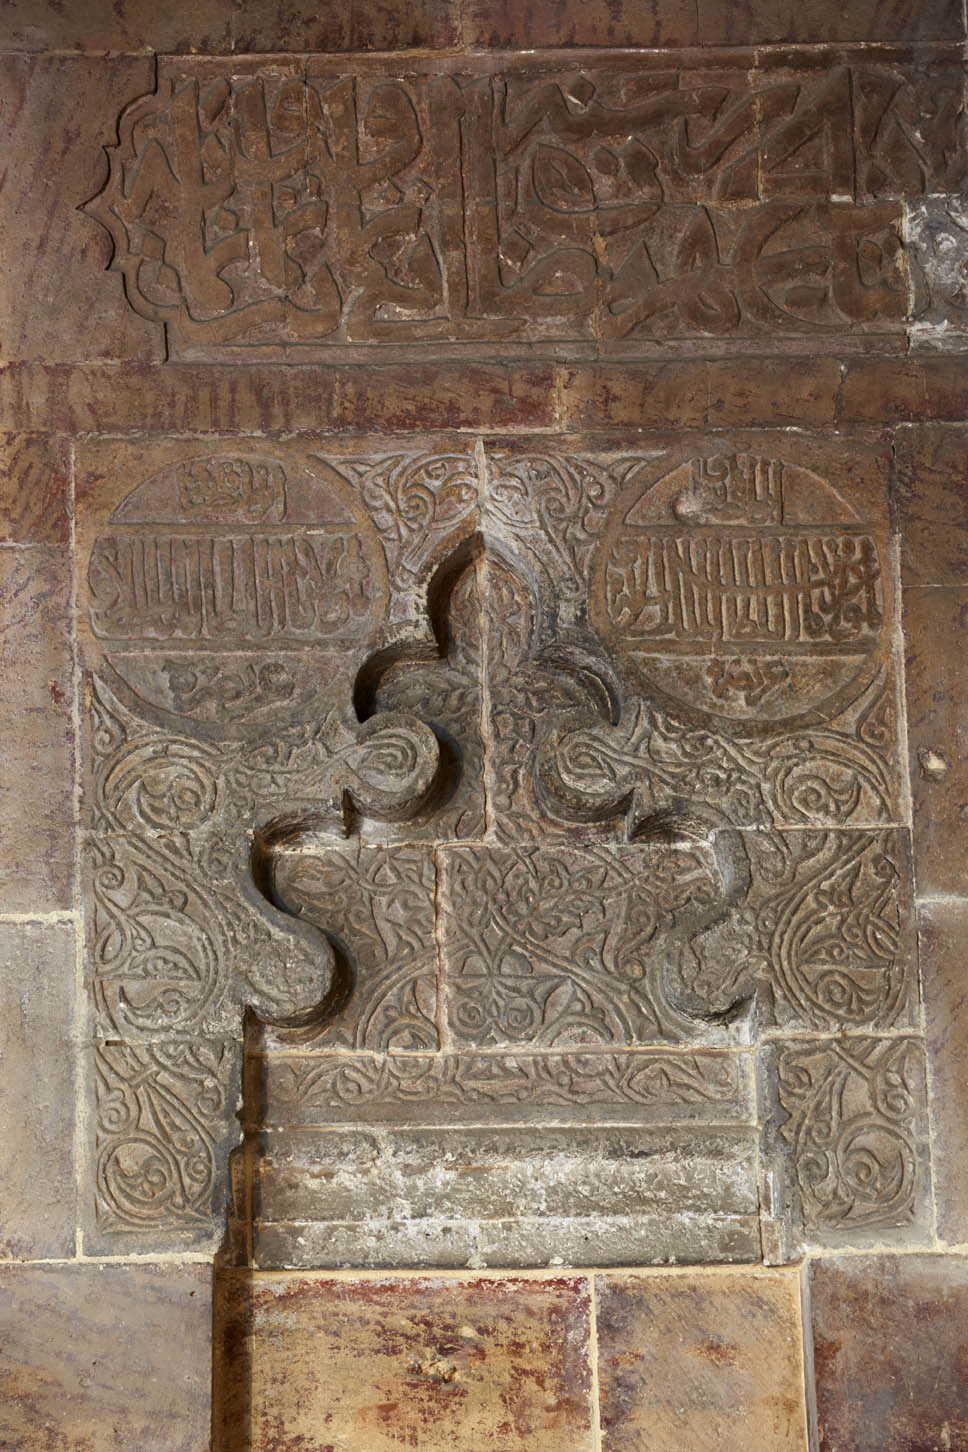 Detail of carved ornament and inscriptions